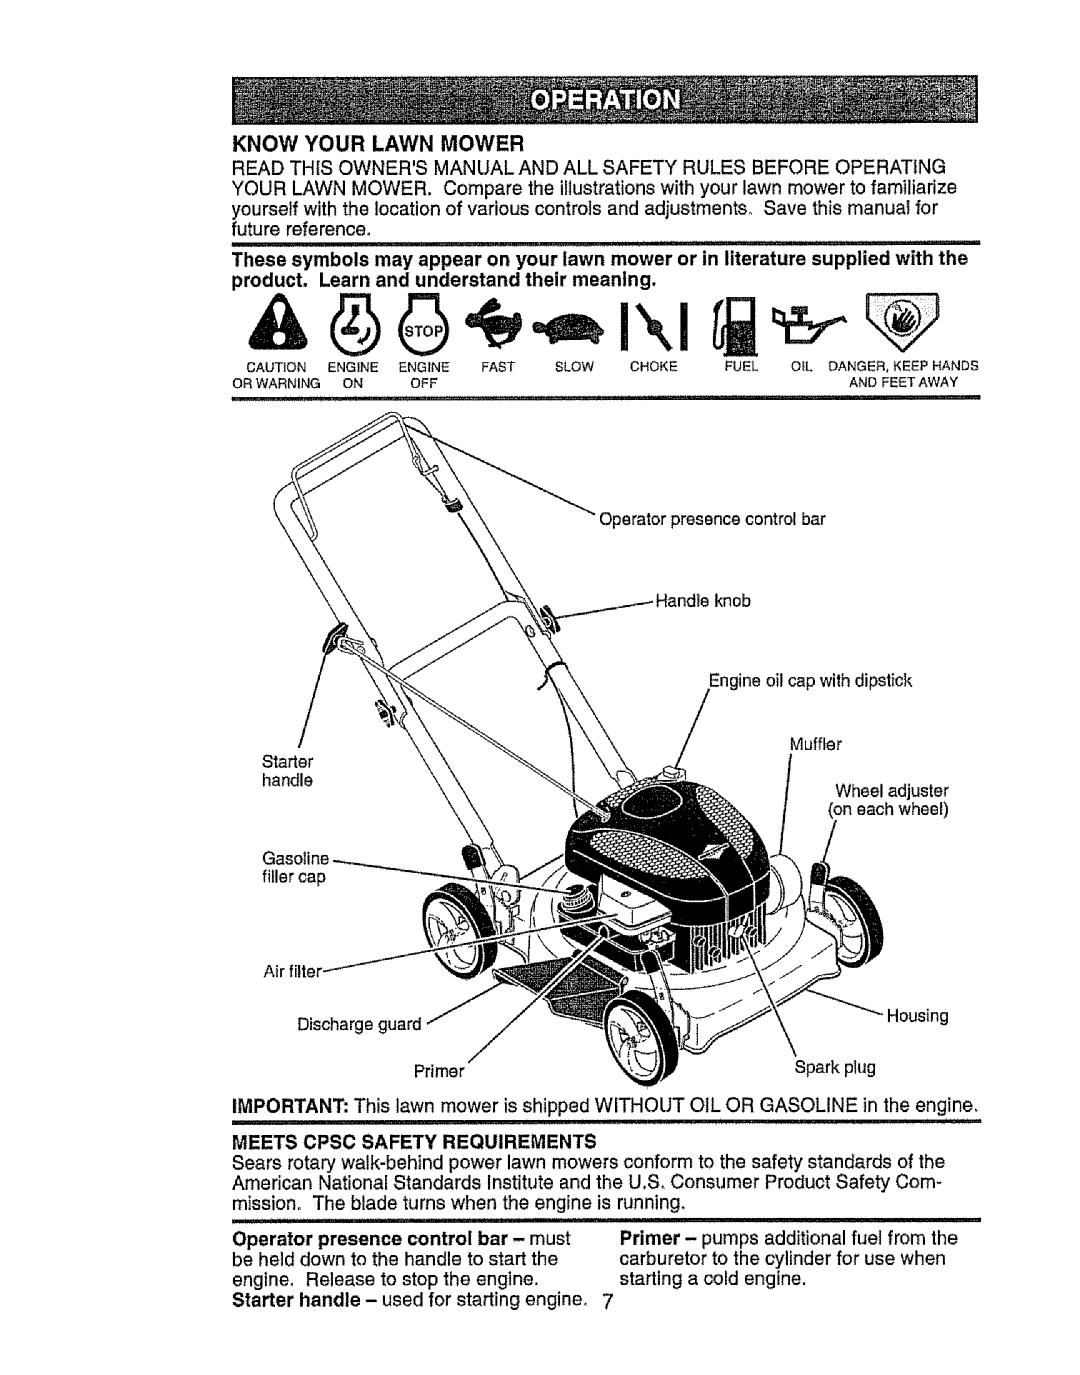 Craftsman 917.385125 owner manual Know Your Lawn Mower, Meets Cpsc Safety Requirements 